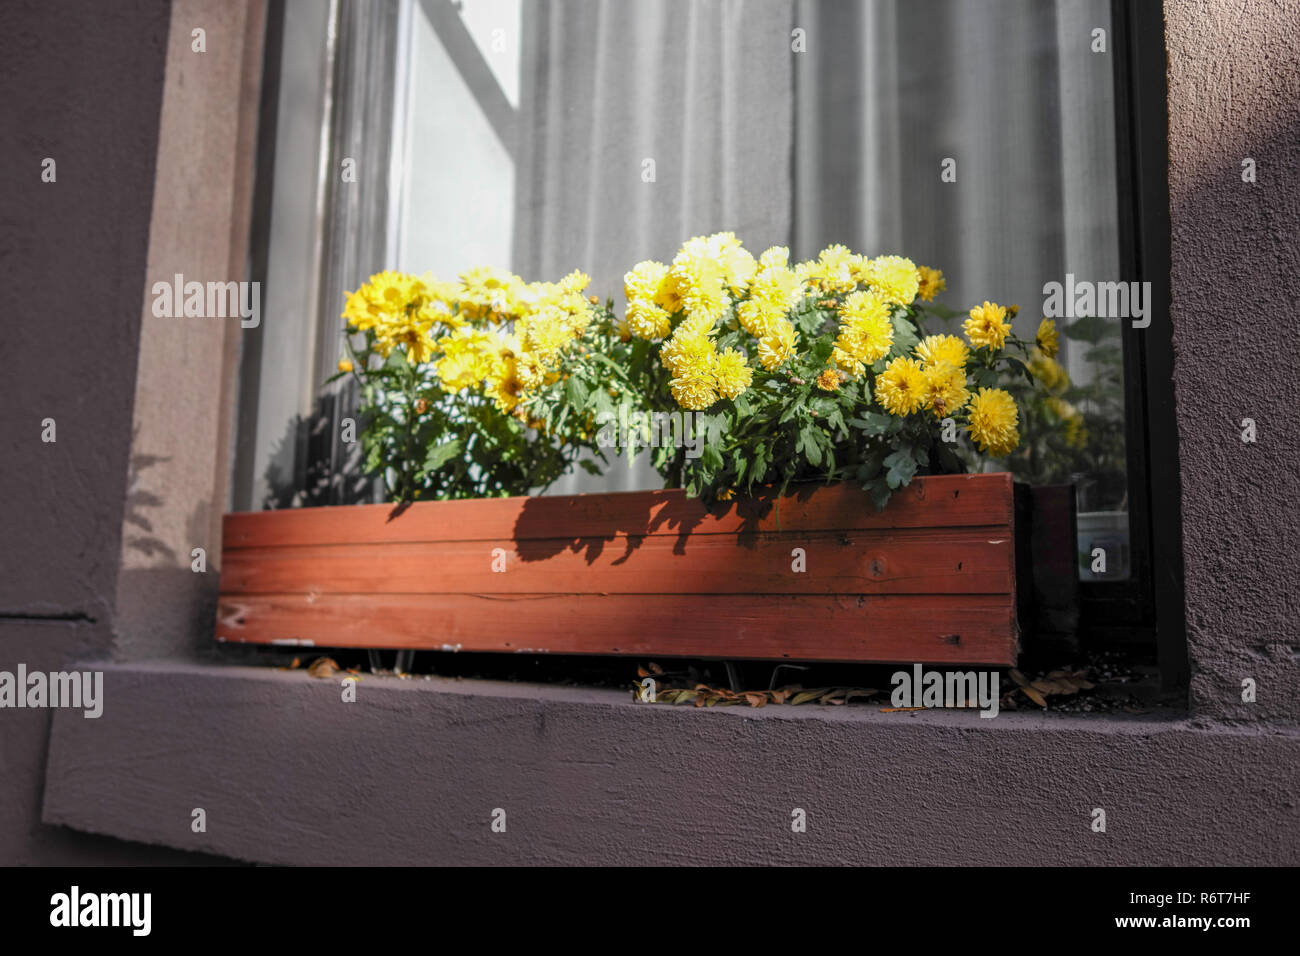 Yellow Box With Flowers On High Resolution Stock Photography And Images Alamy